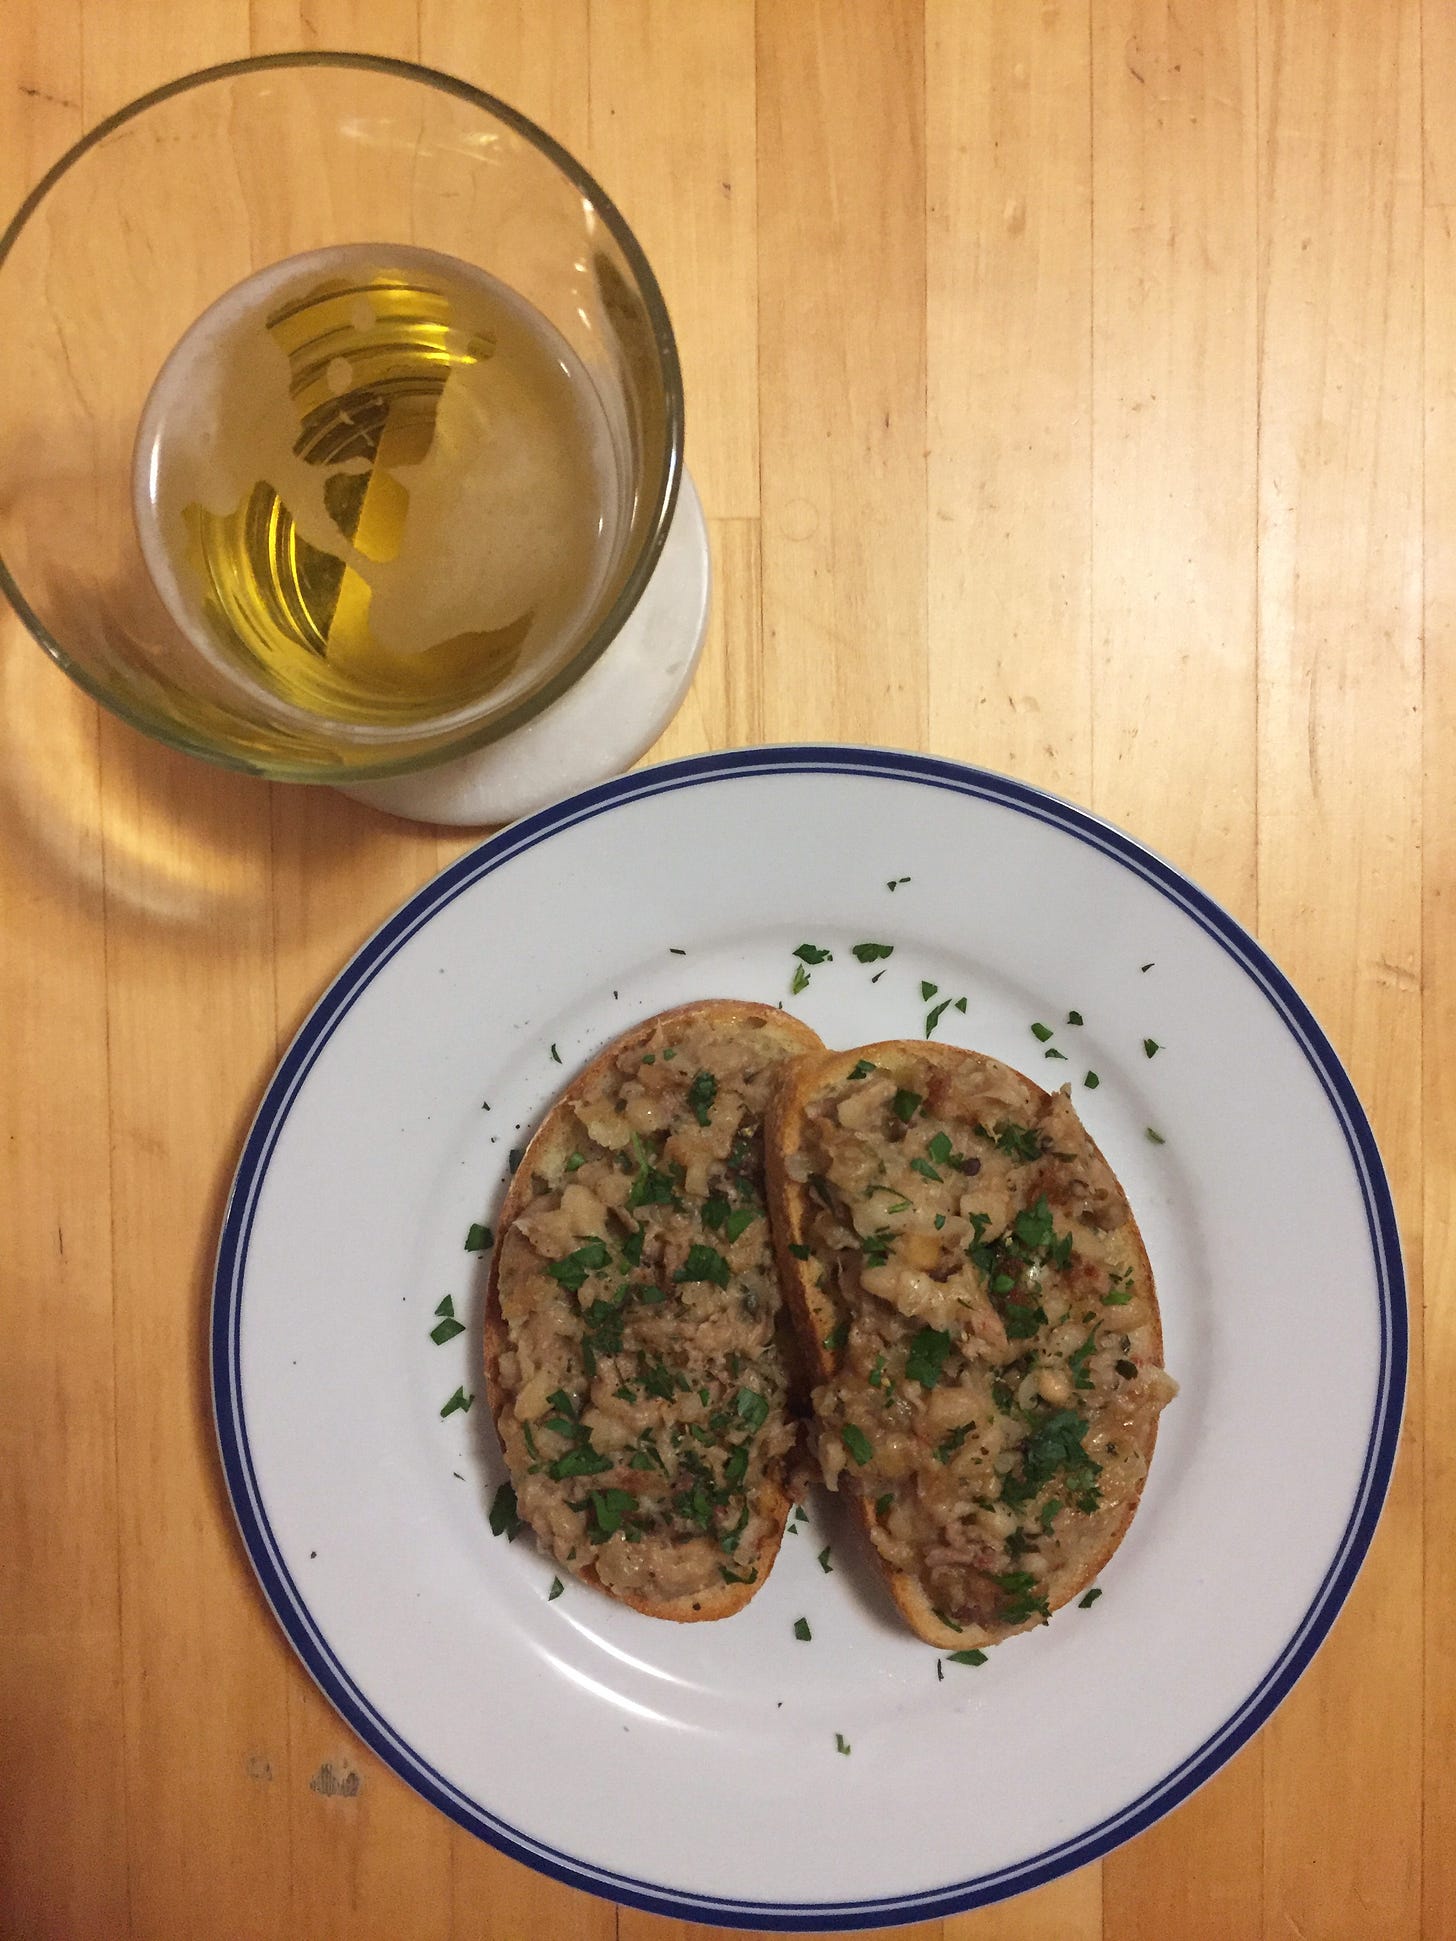 On a white plate with a blue rim are two pieces of toast with the bean and tuna casserole on top, scattered with parsley. Next to the plate is a pale glass of beer.